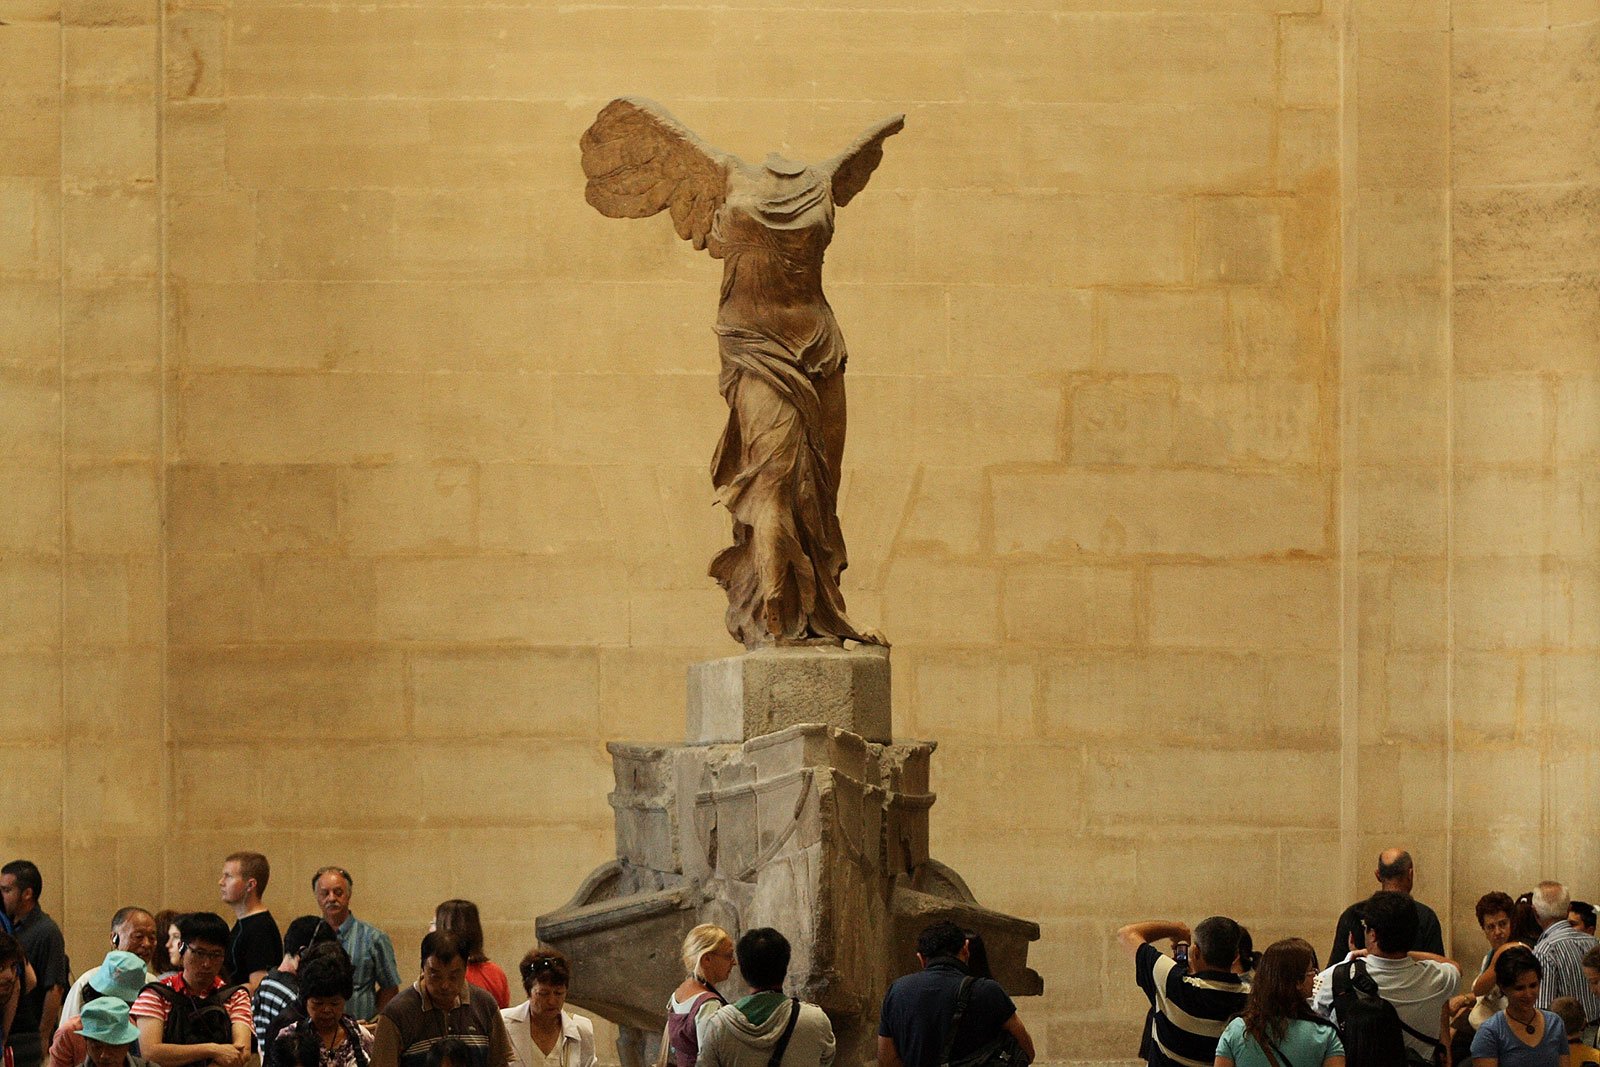 How to see the Nike of Samothrace in Paris